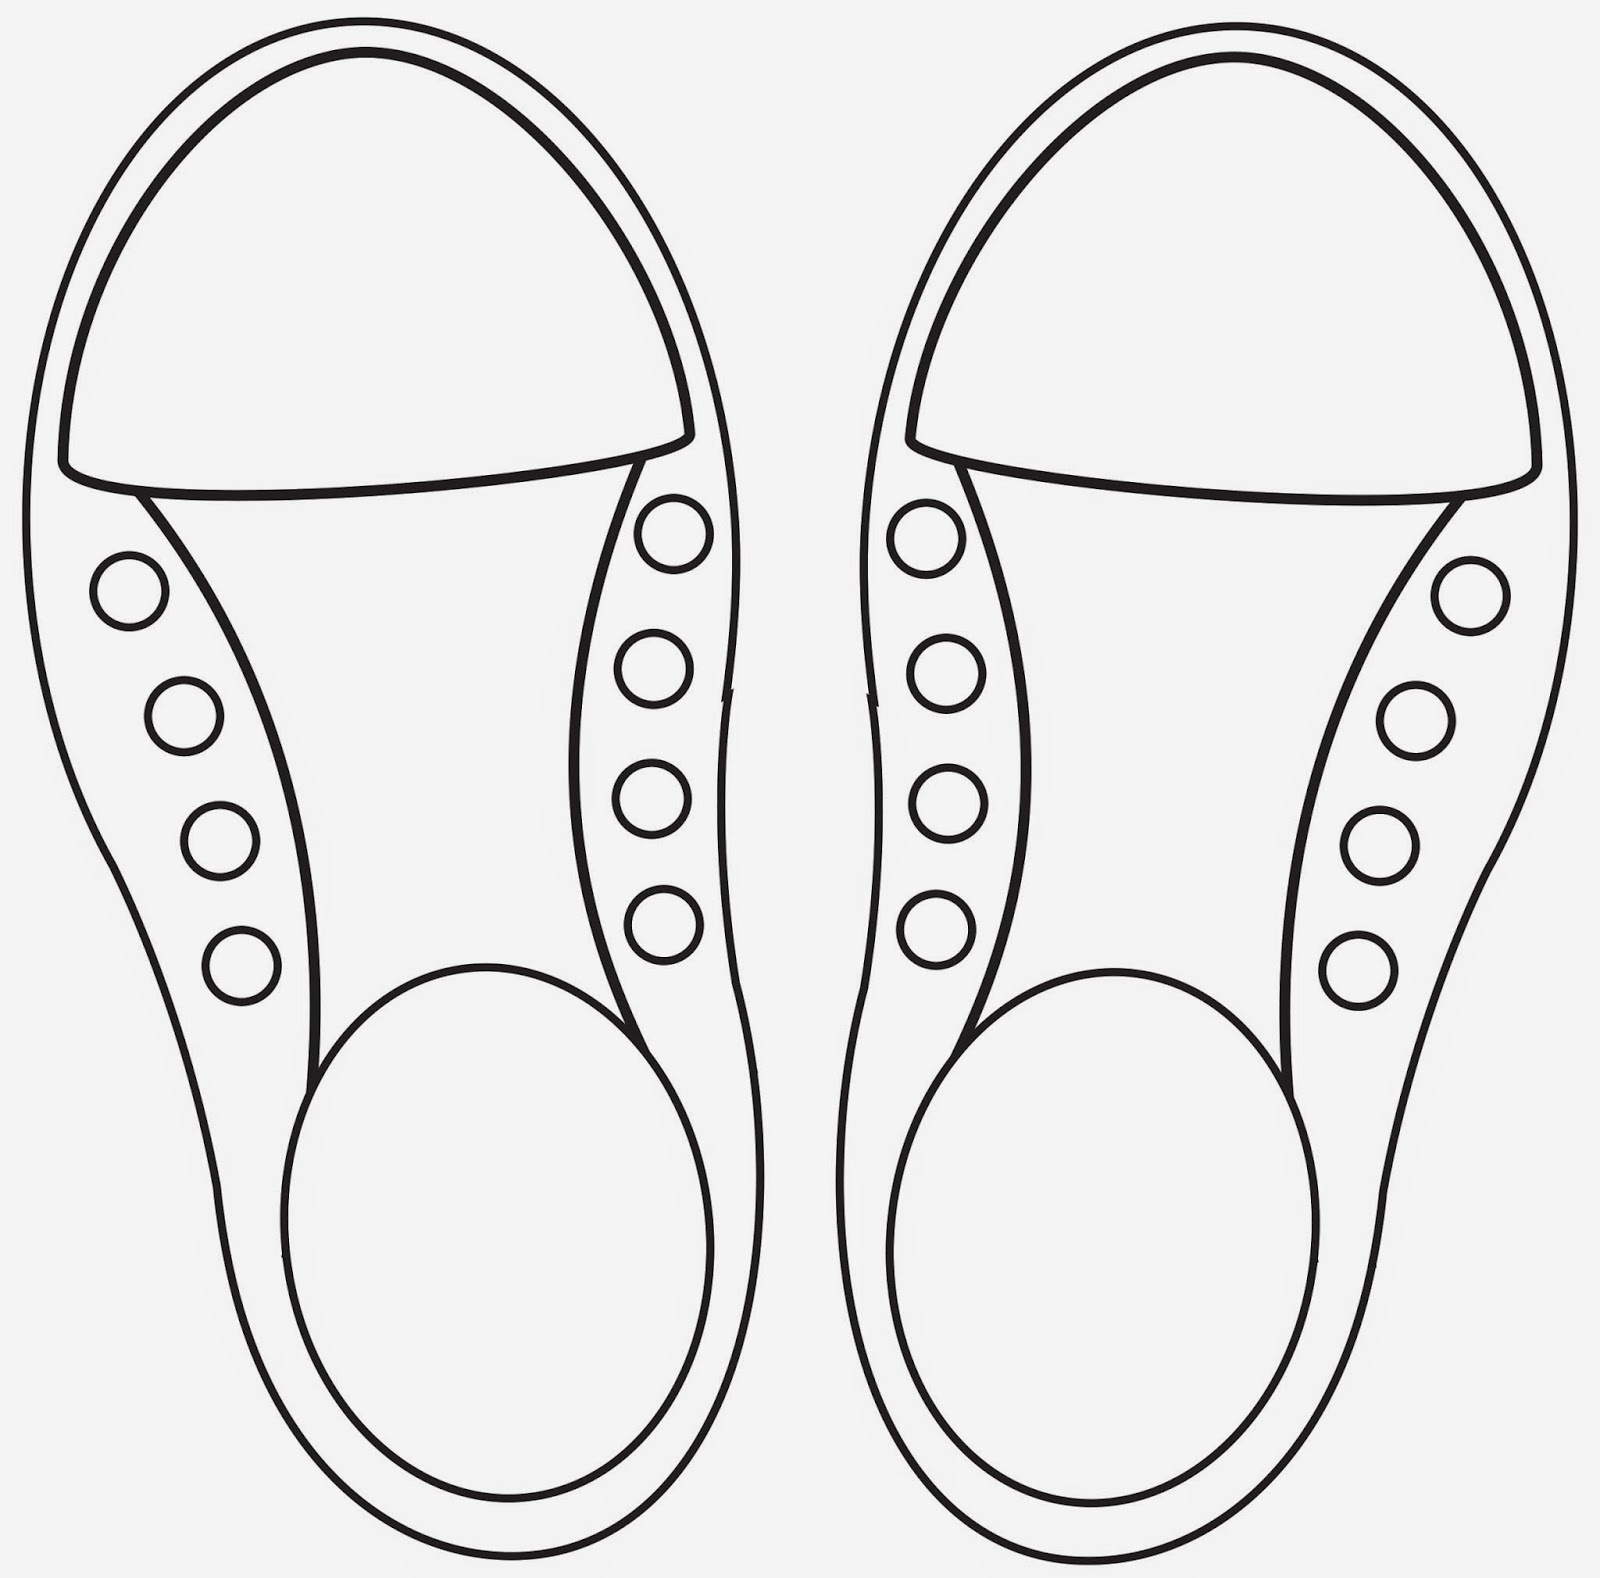 Clip Arts Related To : can tie my shoes clipart. 